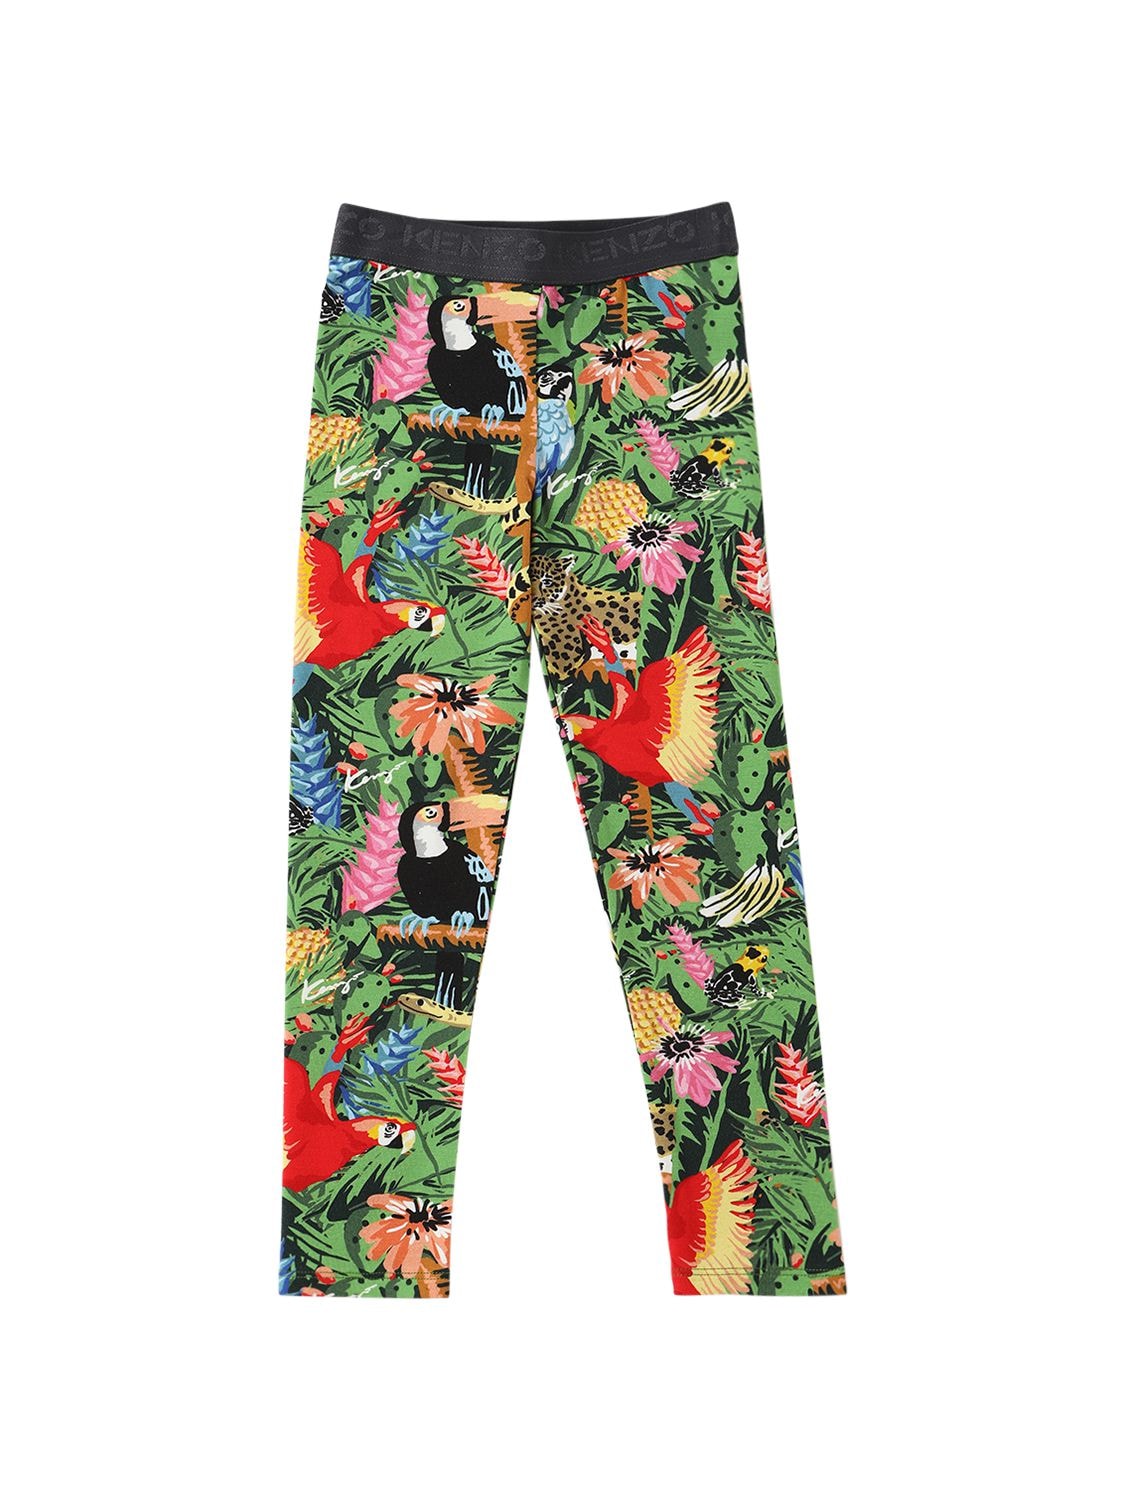 KENZO ALL OVER PRINT COTTON JERSEY LEGGINGS